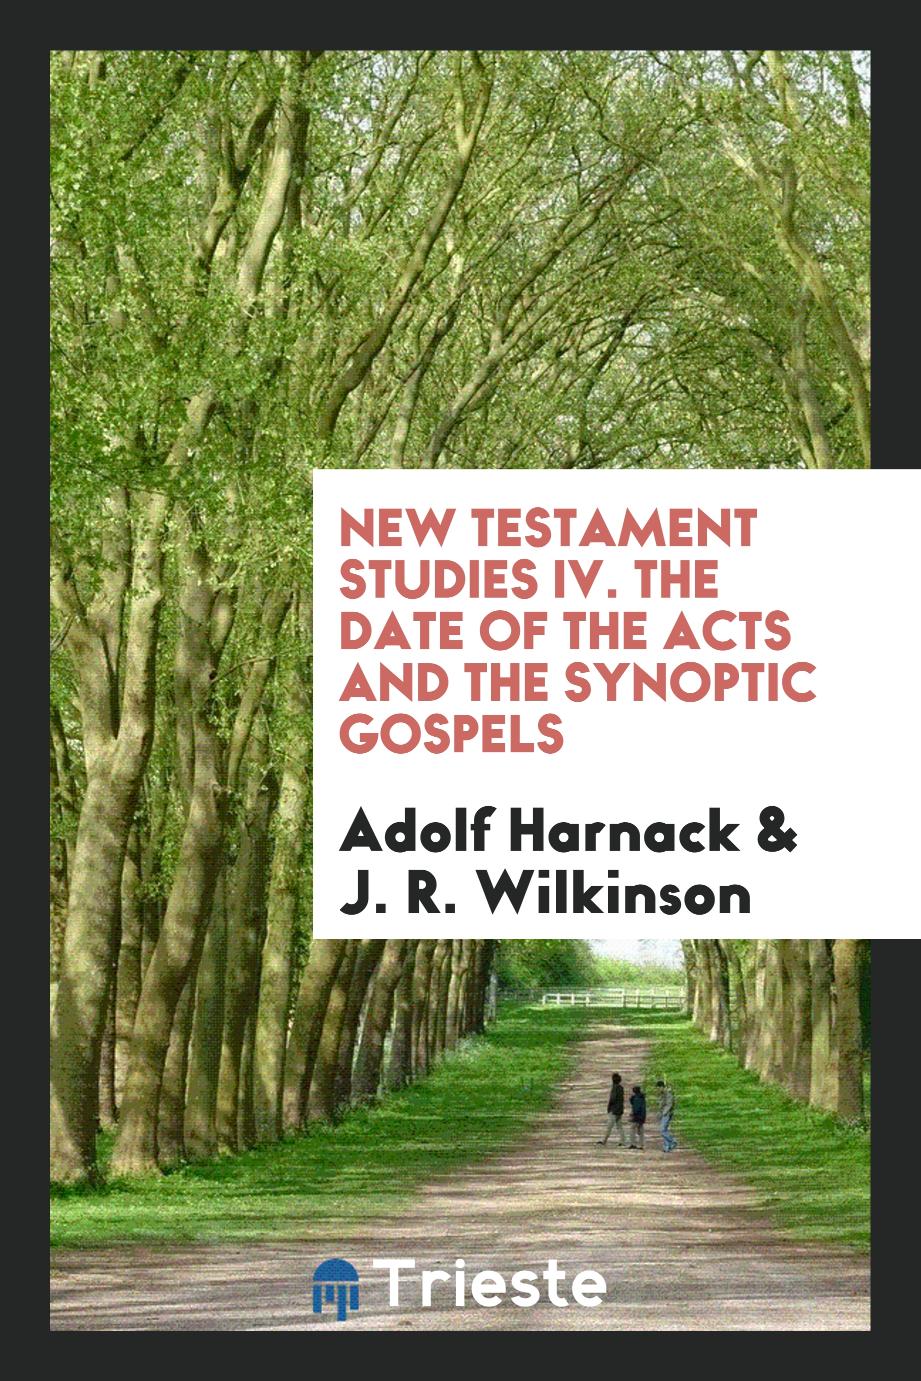 New Testament studies IV. The date of the Acts and the synoptic gospels